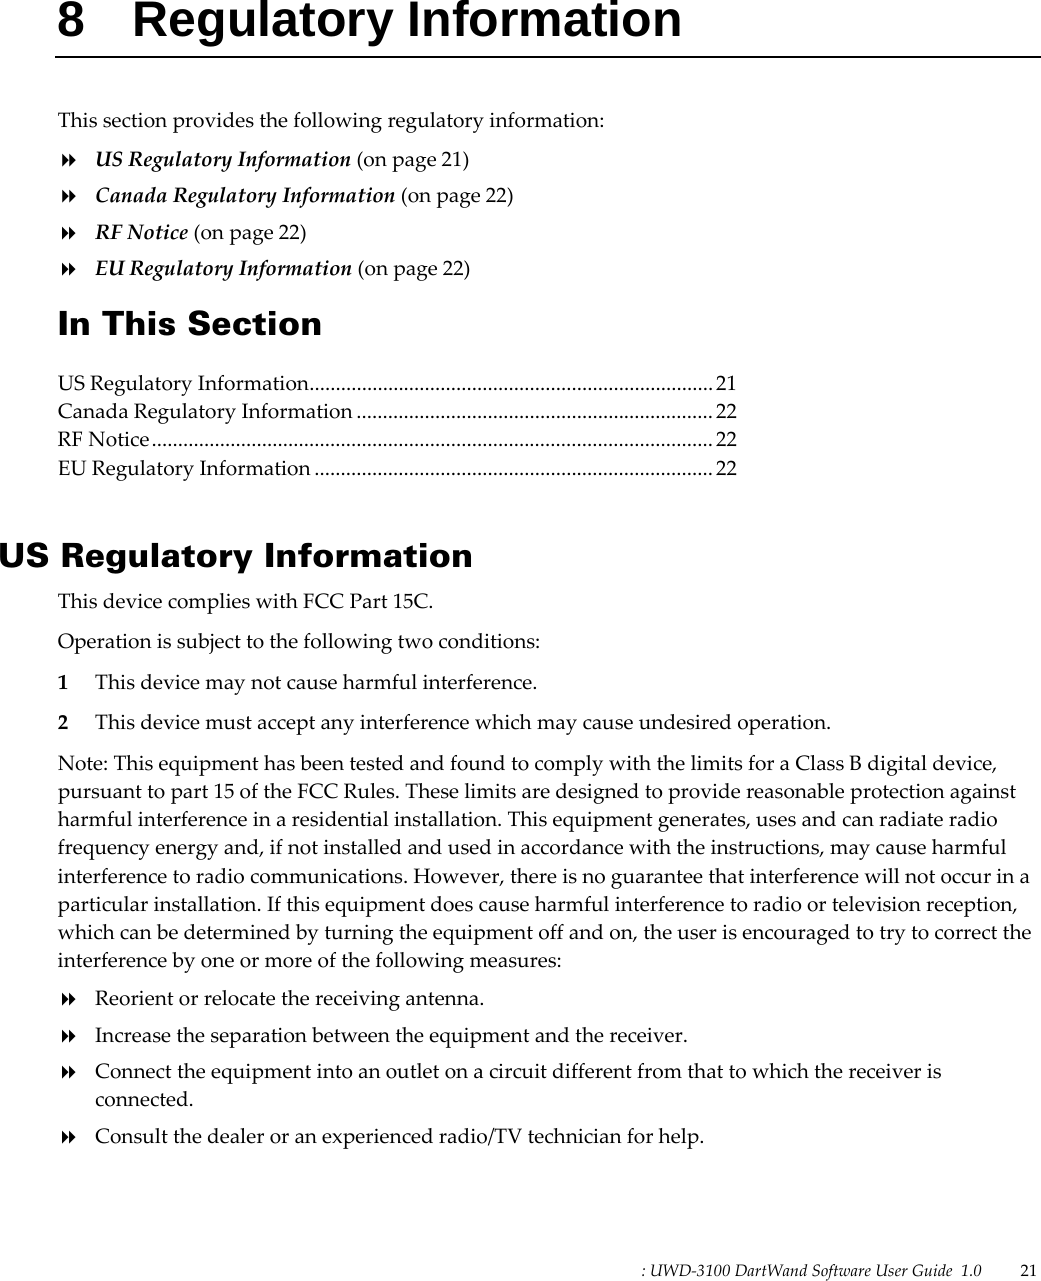 : UWD-3100 DartWand Software User Guide  1.0   21   8 Regulatory Information This section provides the following regulatory information:  US Regulatory Information (on page 21)  Canada Regulatory Information (on page 22)  RF Notice (on page 22)  EU Regulatory Information (on page 22) In This Section US Regulatory Information ............................................................................. 21 Canada Regulatory Information .................................................................... 22 RF Notice ........................................................................................................... 22 EU Regulatory Information ............................................................................ 22   US Regulatory Information This device complies with FCC Part 15C. Operation is subject to the following two conditions: 1 This device may not cause harmful interference. 2 This device must accept any interference which may cause undesired operation. Note: This equipment has been tested and found to comply with the limits for a Class B digital device, pursuant to part 15 of the FCC Rules. These limits are designed to provide reasonable protection against harmful interference in a residential installation. This equipment generates, uses and can radiate radio frequency energy and, if not installed and used in accordance with the instructions, may cause harmful interference to radio communications. However, there is no guarantee that interference will not occur in a particular installation. If this equipment does cause harmful interference to radio or television reception, which can be determined by turning the equipment off and on, the user is encouraged to try to correct the interference by one or more of the following measures:  Reorient or relocate the receiving antenna.  Increase the separation between the equipment and the receiver.  Connect the equipment into an outlet on a circuit different from that to which the receiver is connected.  Consult the dealer or an experienced radio/TV technician for help.  